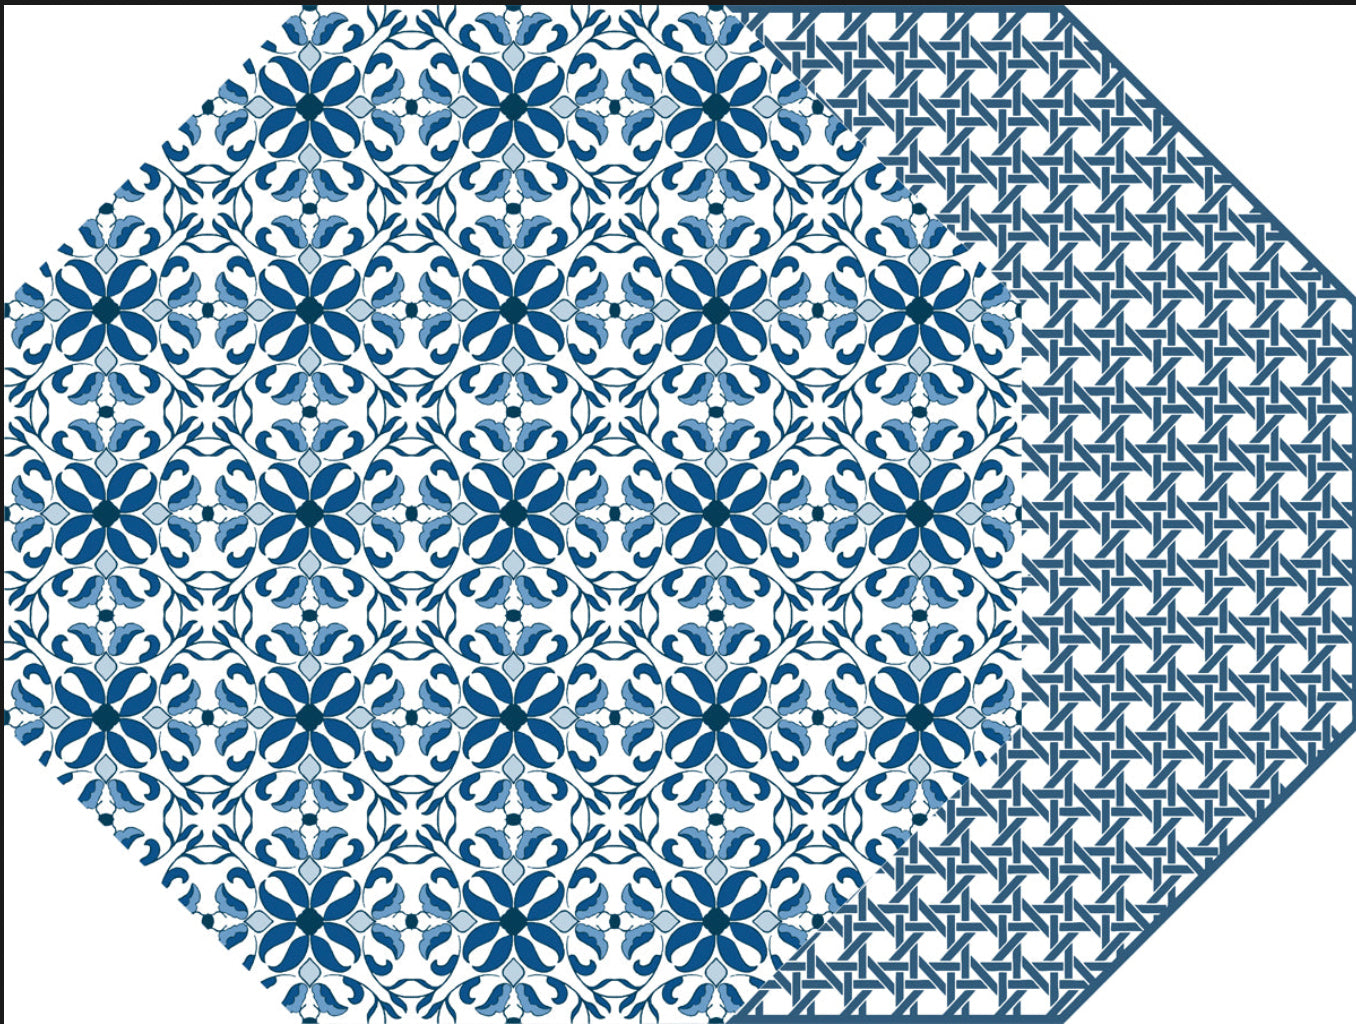 OCTAGONAL TWO SIDED PORTO AND CANE PLACEMAT ~ NAVY